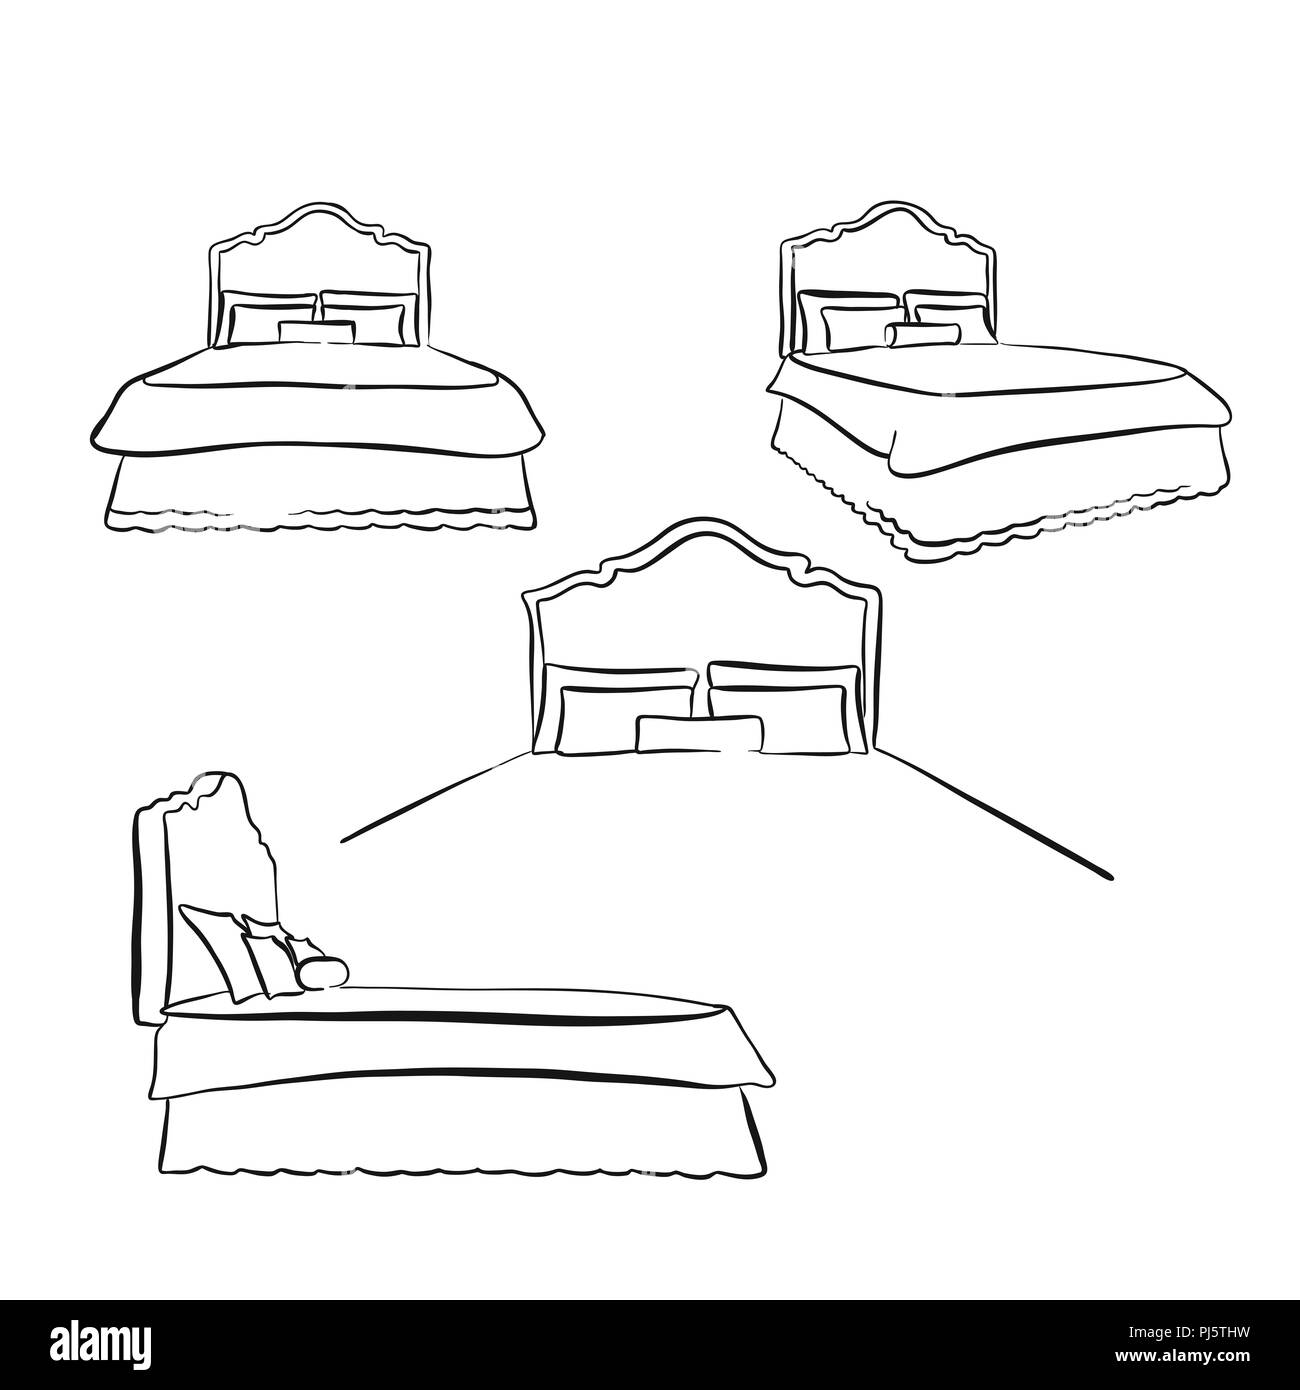 old kind size bed drawing. hand-drawn vector sketch. business concept